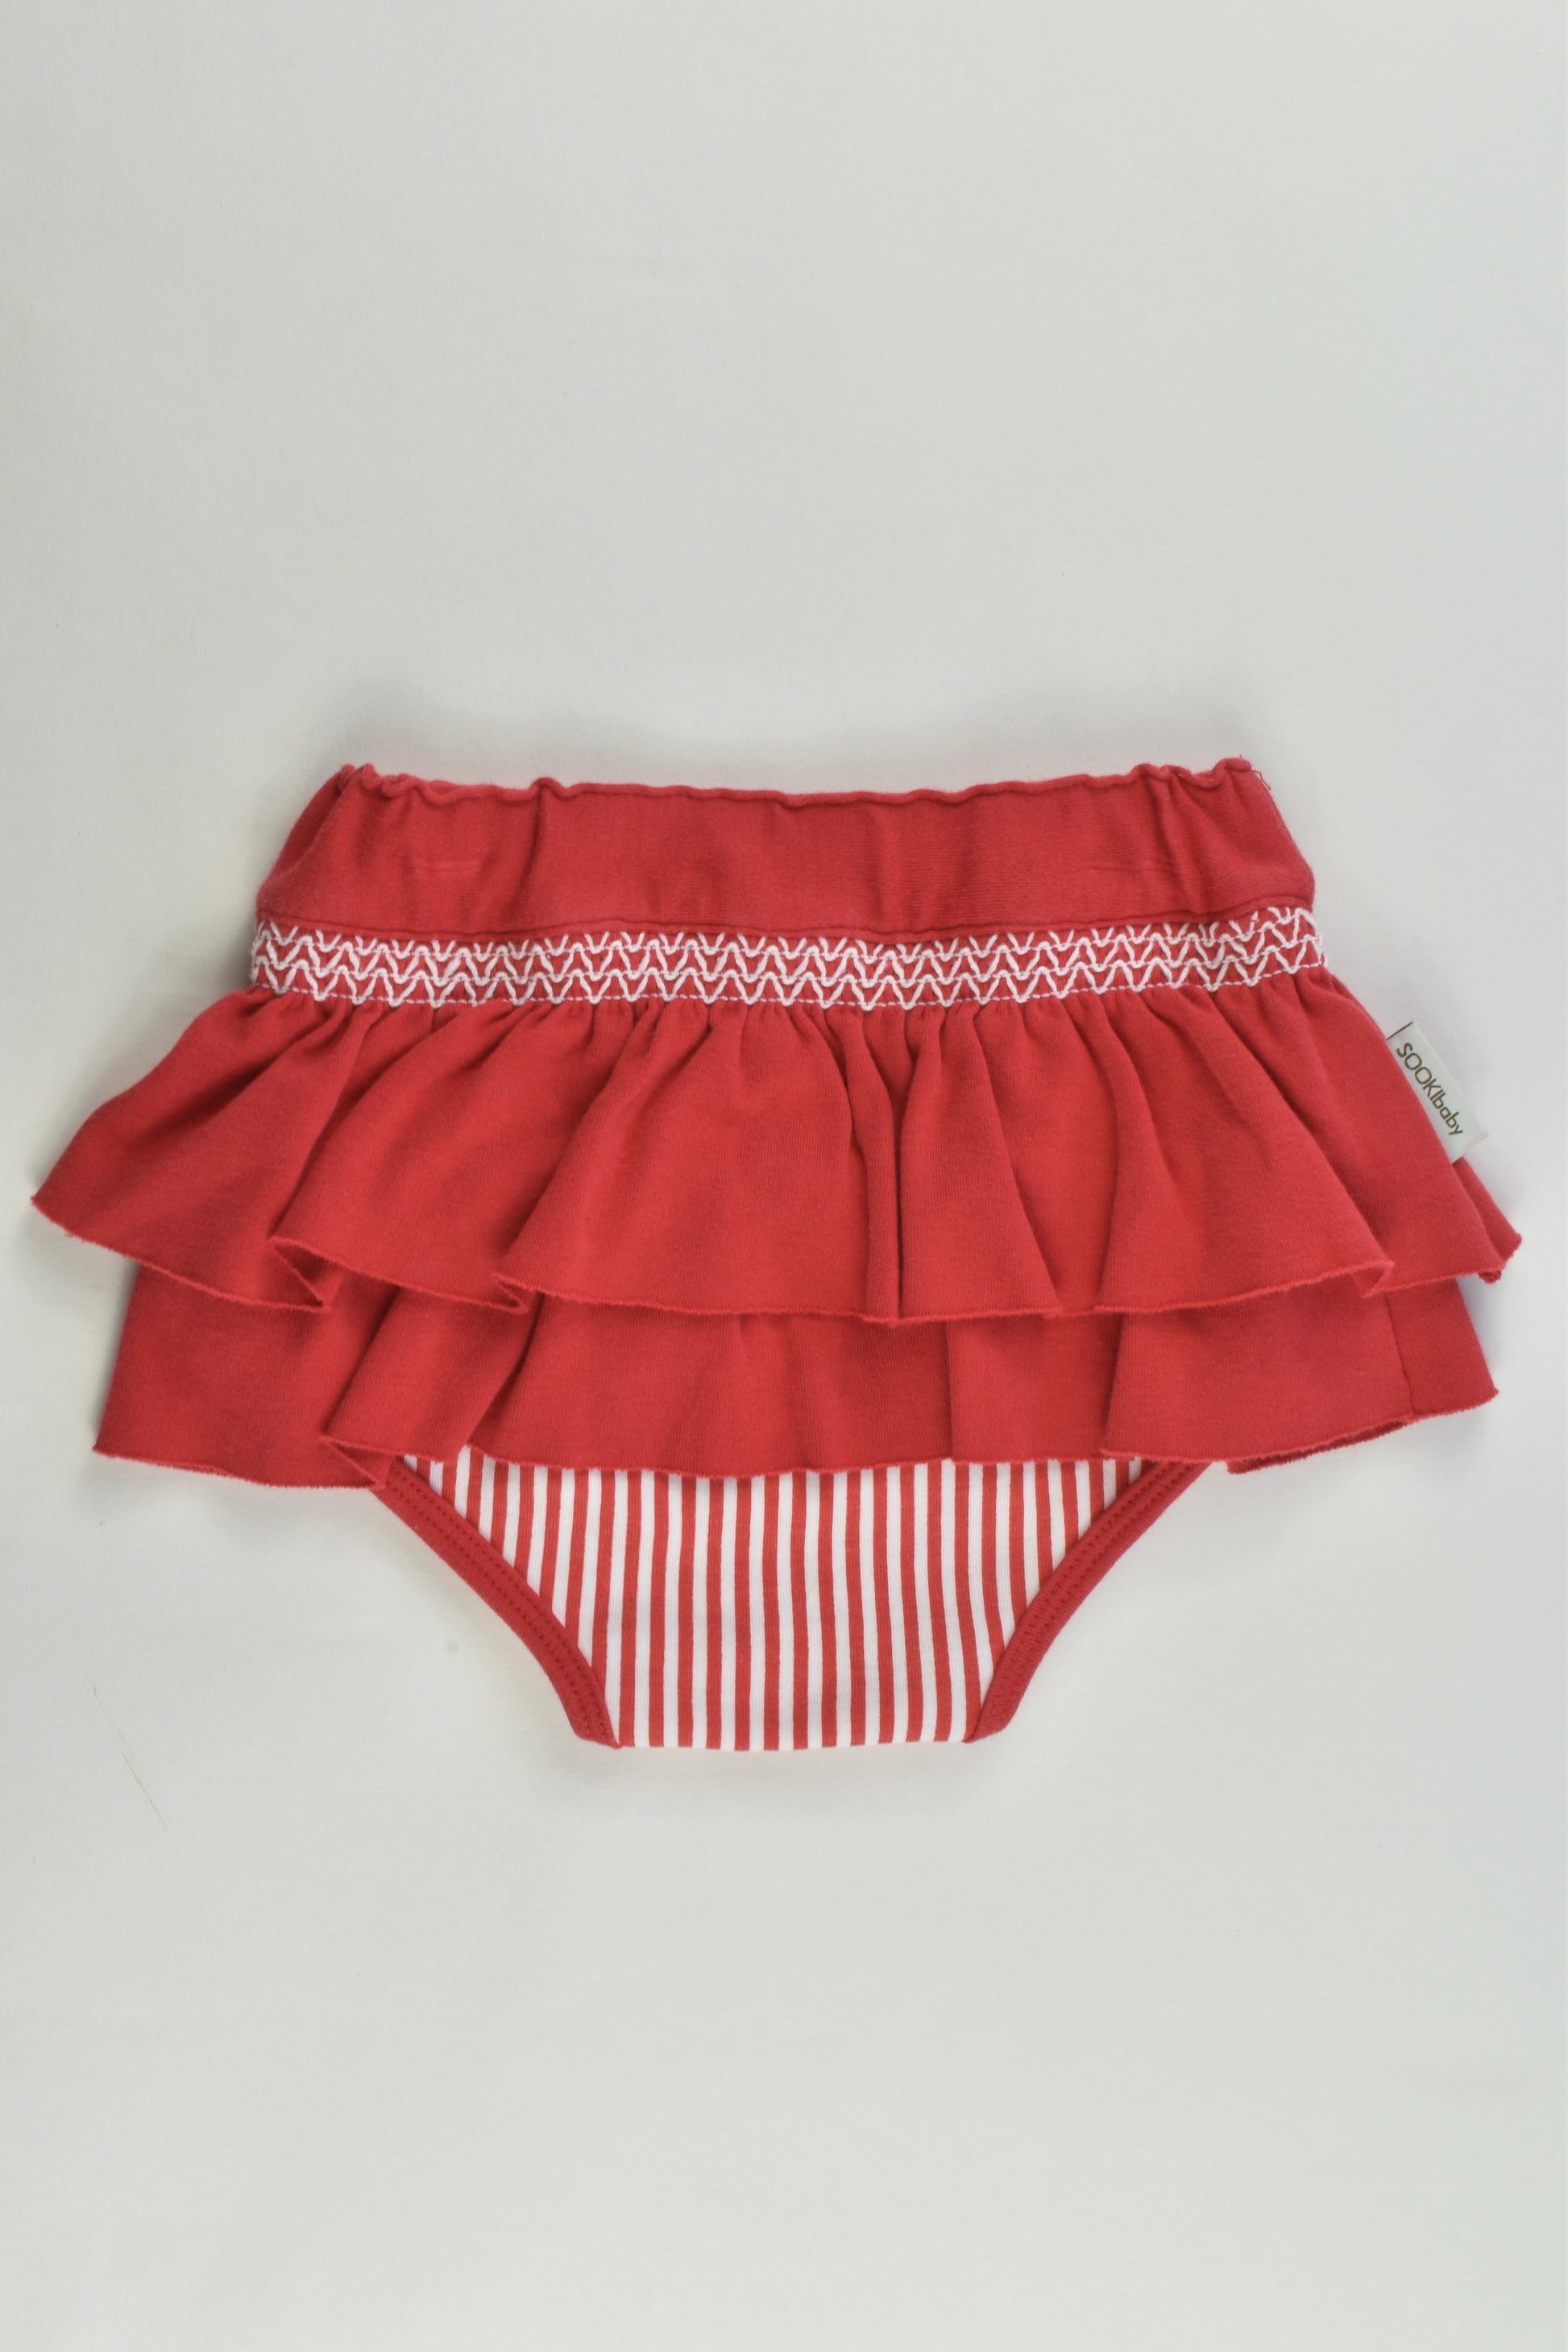 SOOKIbaby Size 00 Bloomers